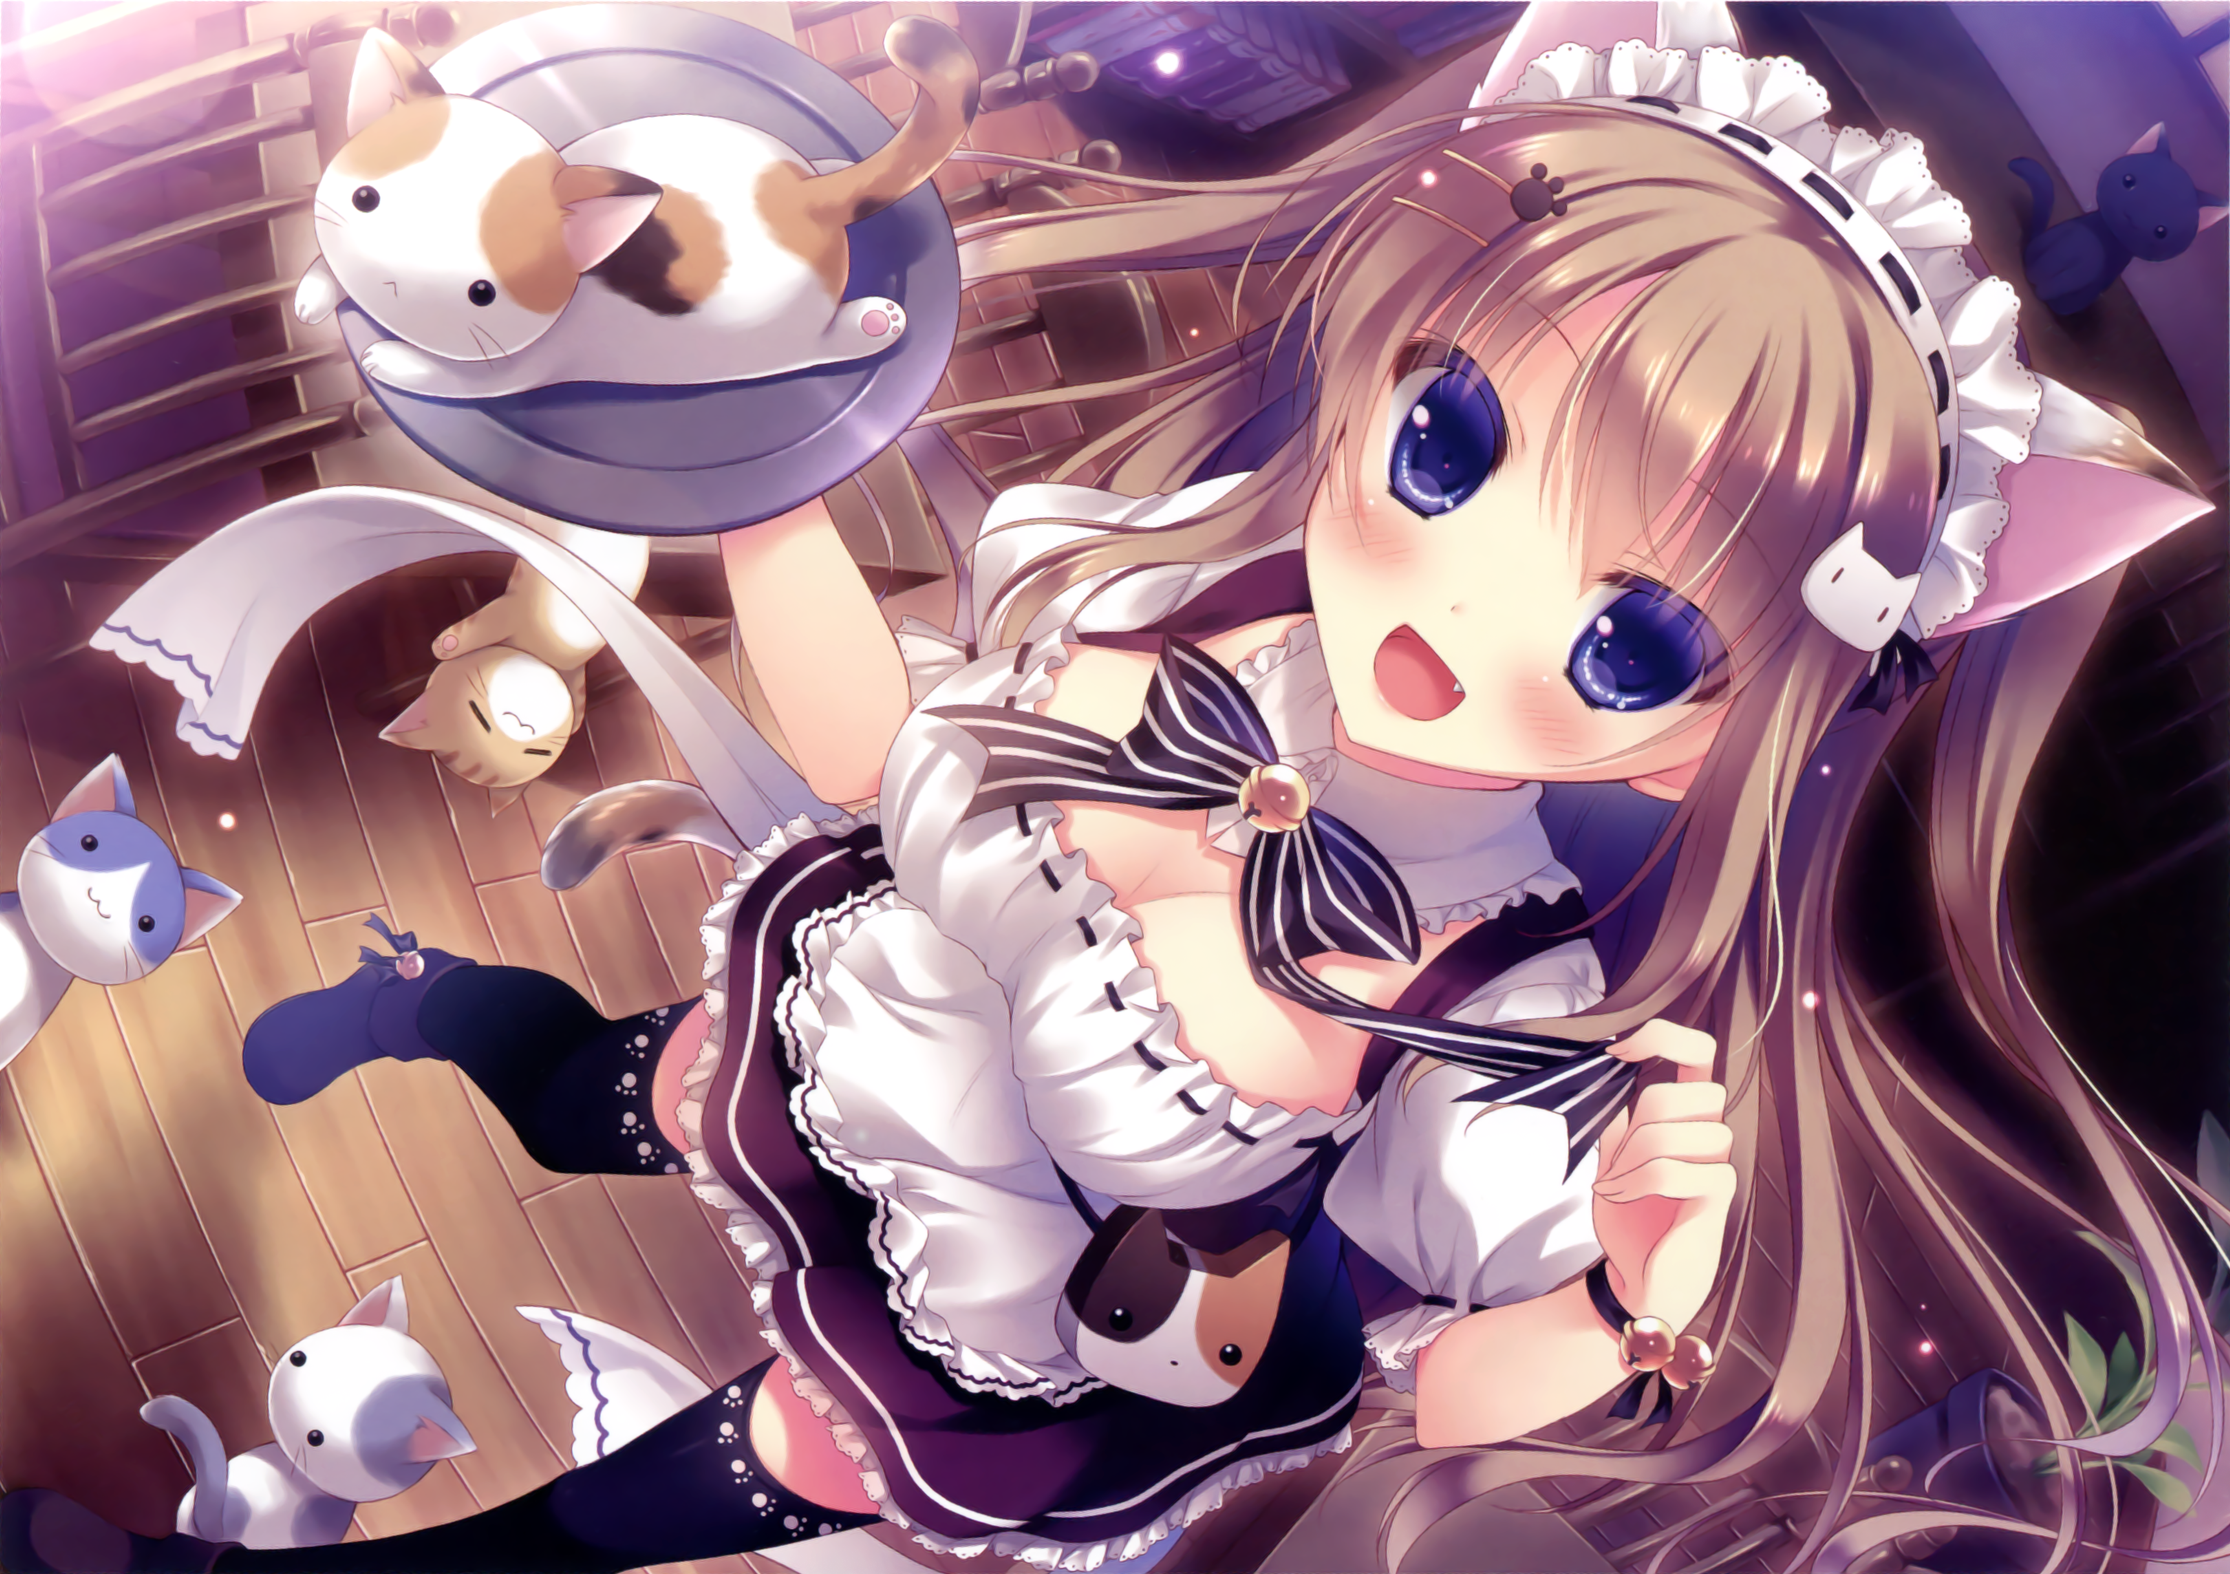 Anime 2230x1574 anime girls anime visual novel Nyan Cafe Macchiato cat girl blue eyes blonde maid outfit cleavage cats Yukie open mouth animals mammals boobs looking at viewer long hair stockings face maid